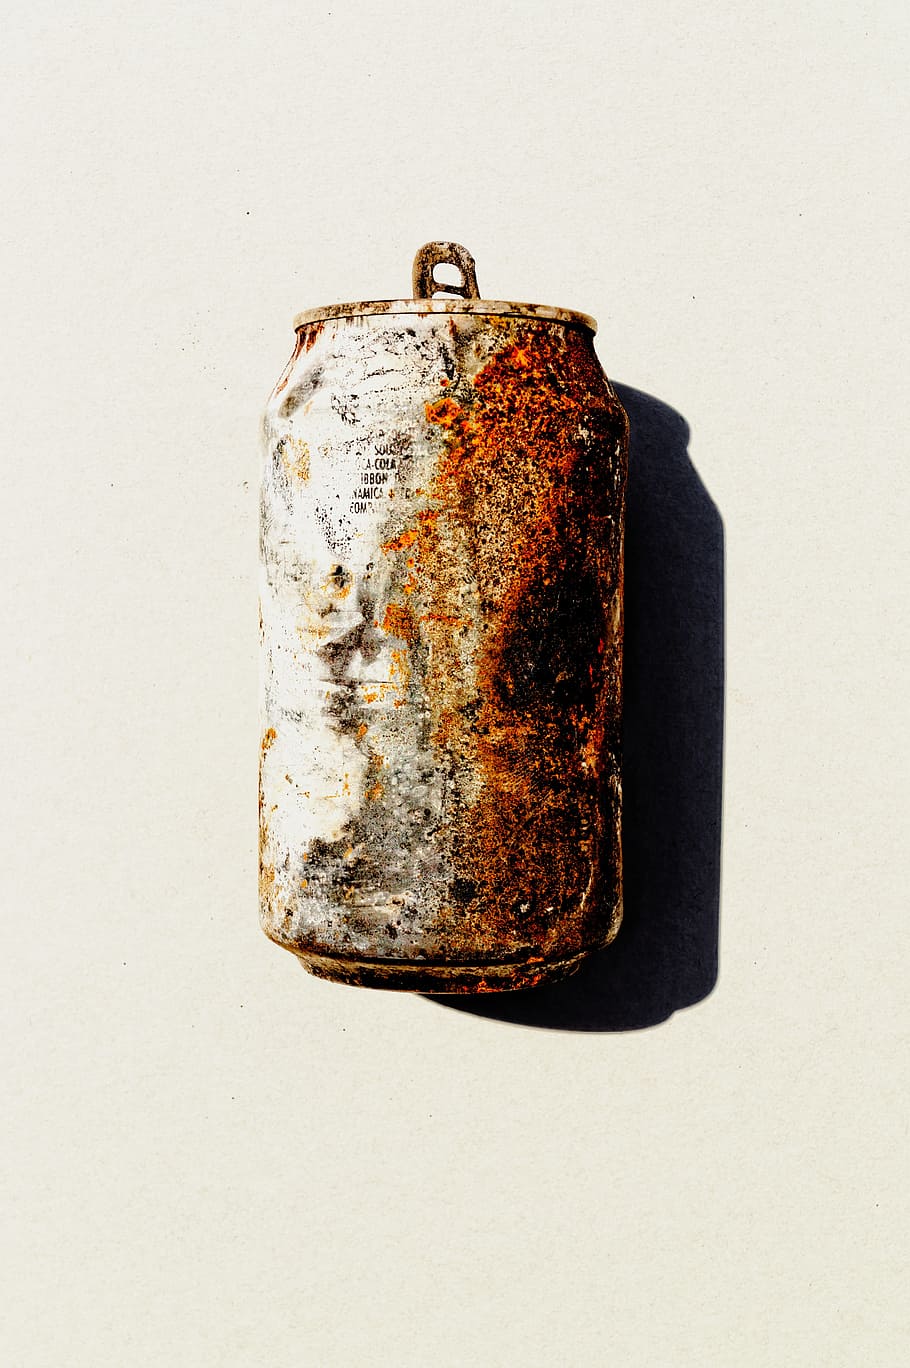 rusty tin can, close up, single Object, old, backgrounds, steel